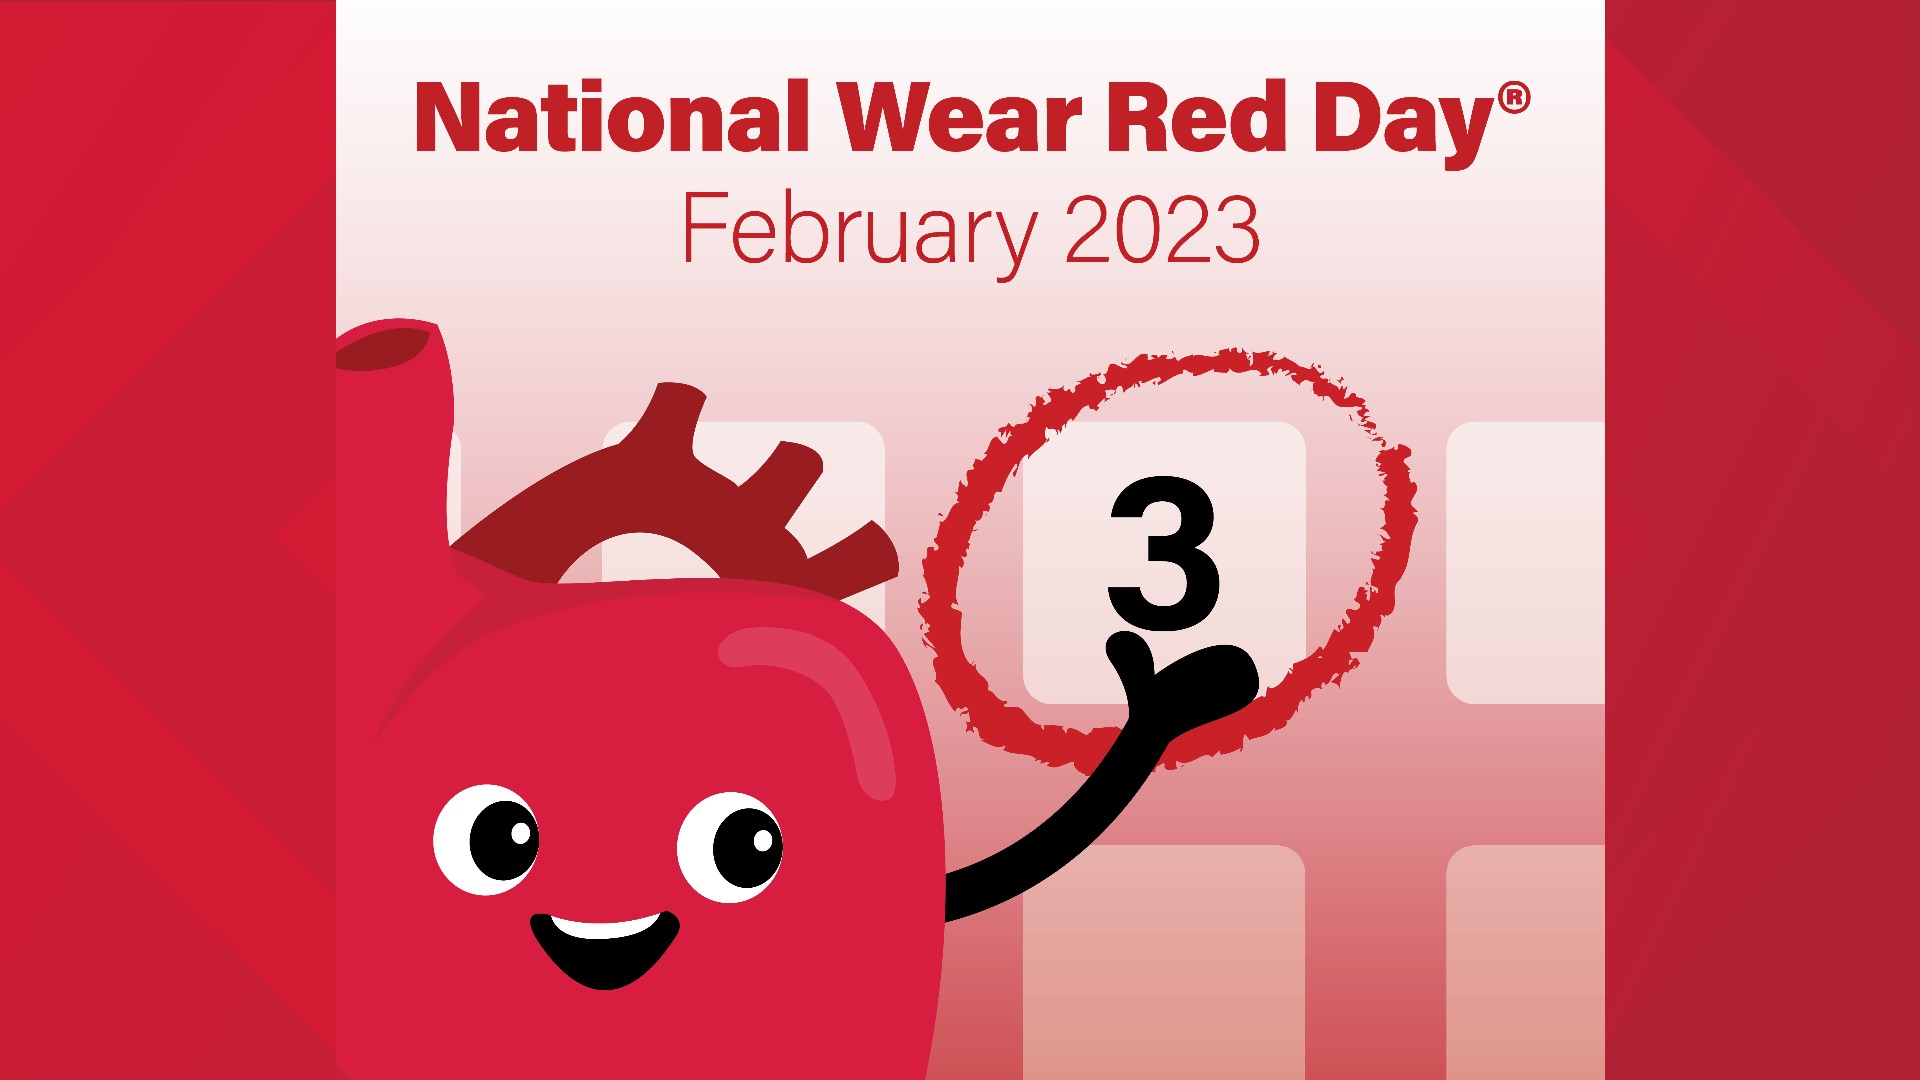 "Going Red" is as easy as putting on a red dress, a red tie or a red accessory.